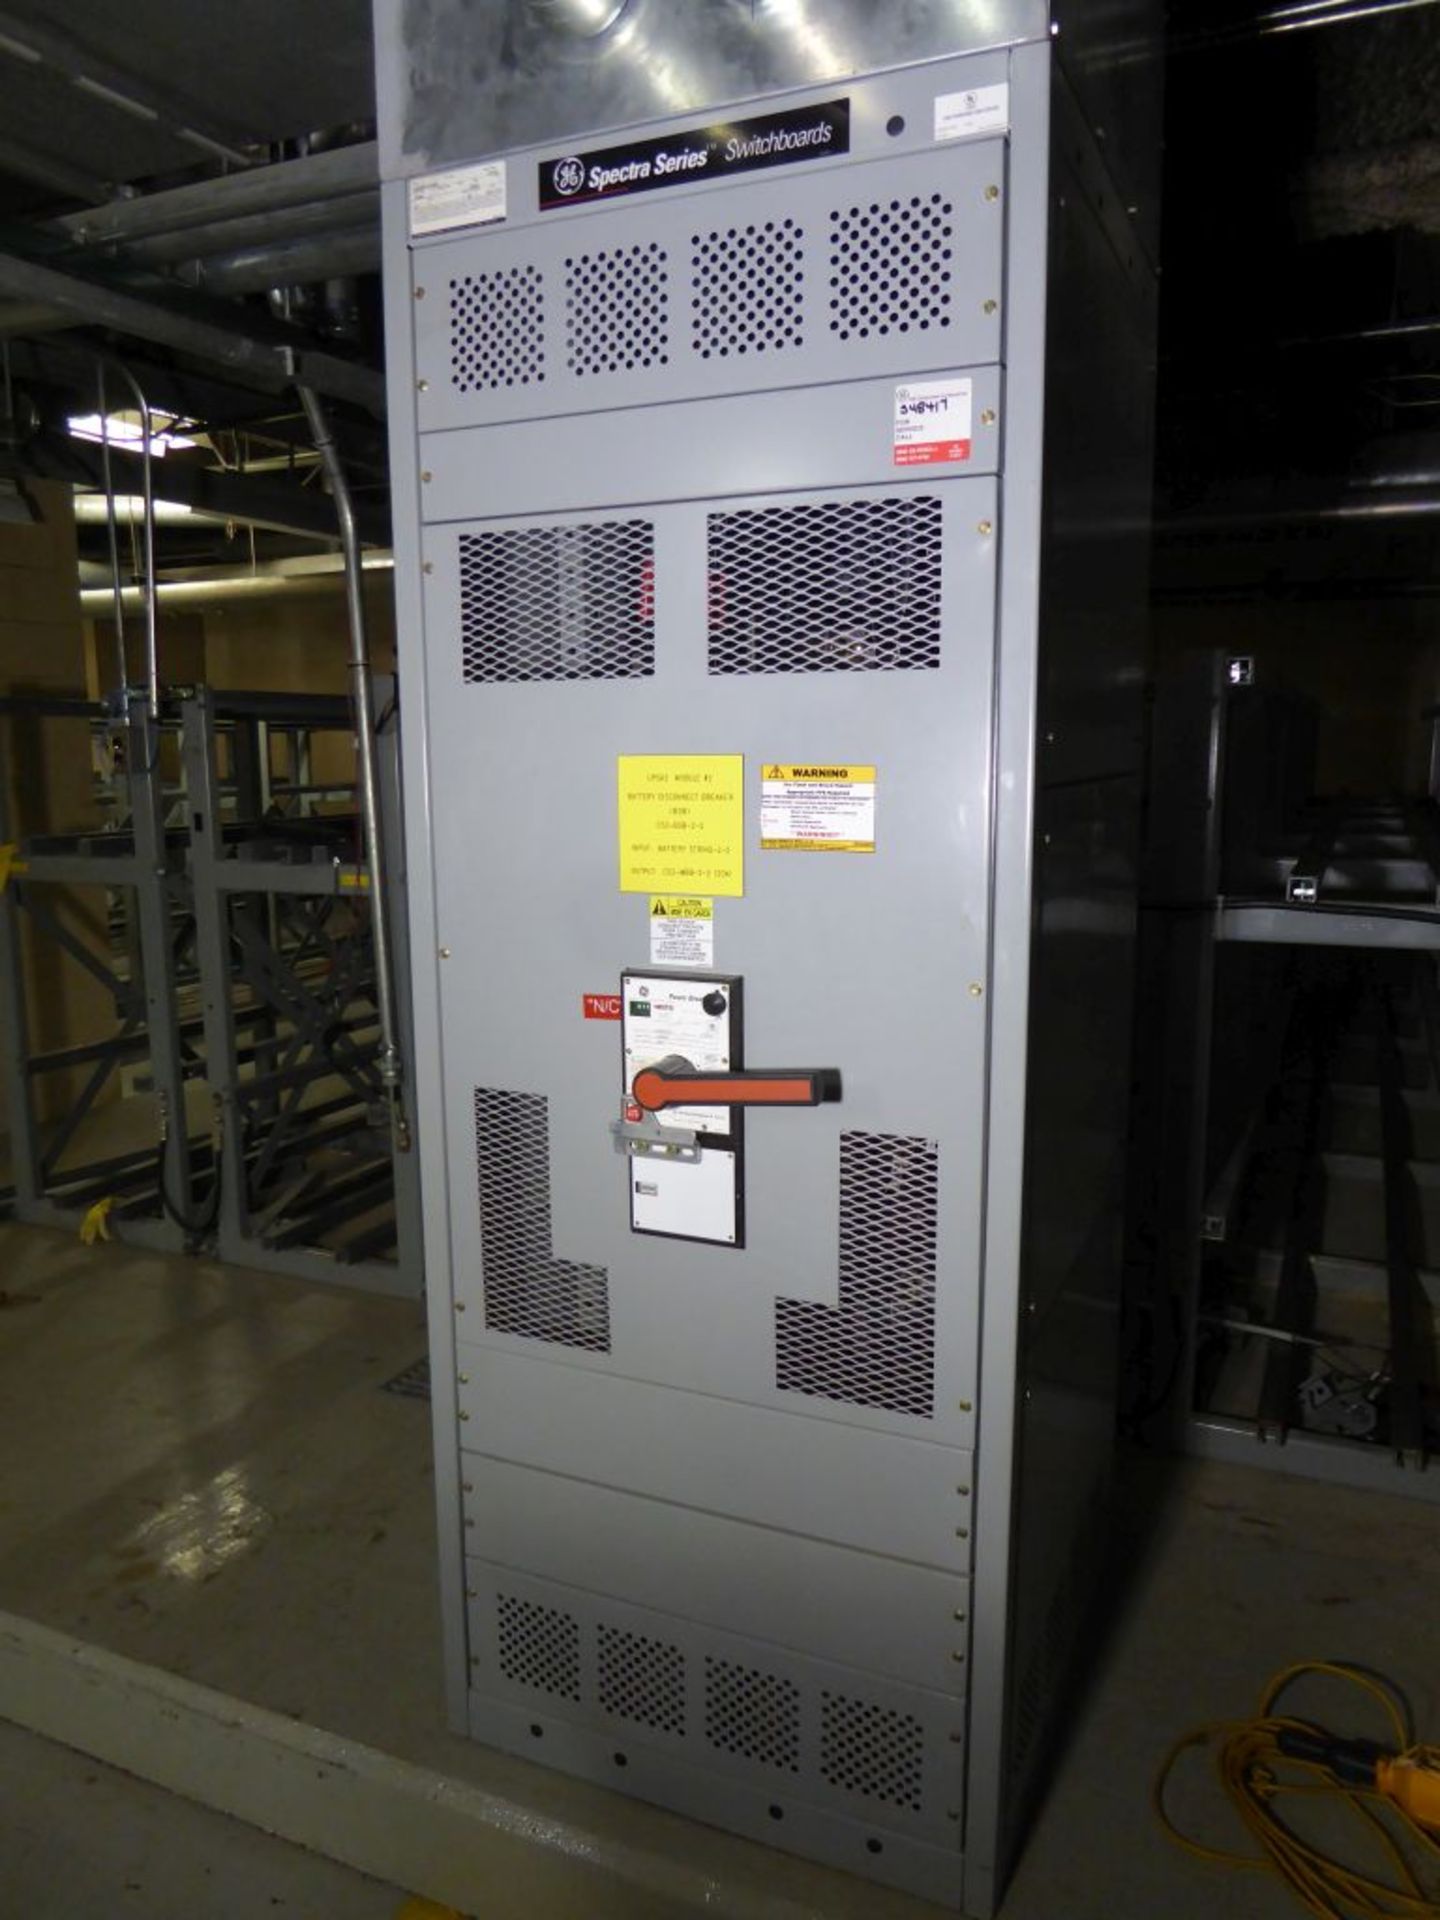 Charlotte, NC - GE 2000A Spectra Series Switchboard